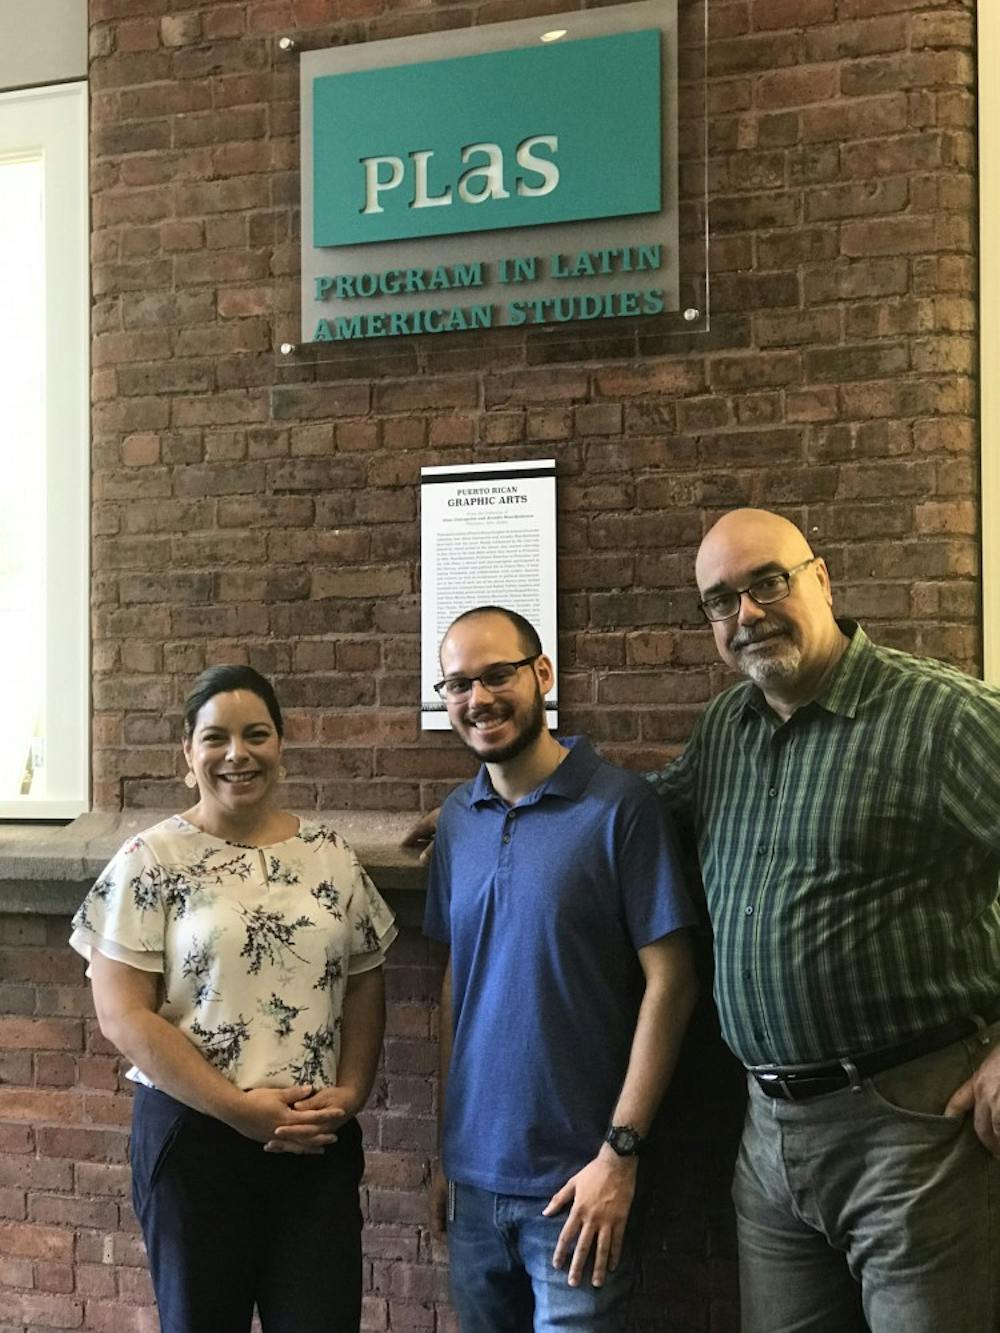 VISAPUR Marla Perez-Lugo, Javier A. Nieves Torres, and Cecilio Ortiz Garcia on Monday, Jul. 16, soon after their arrival at Princeton